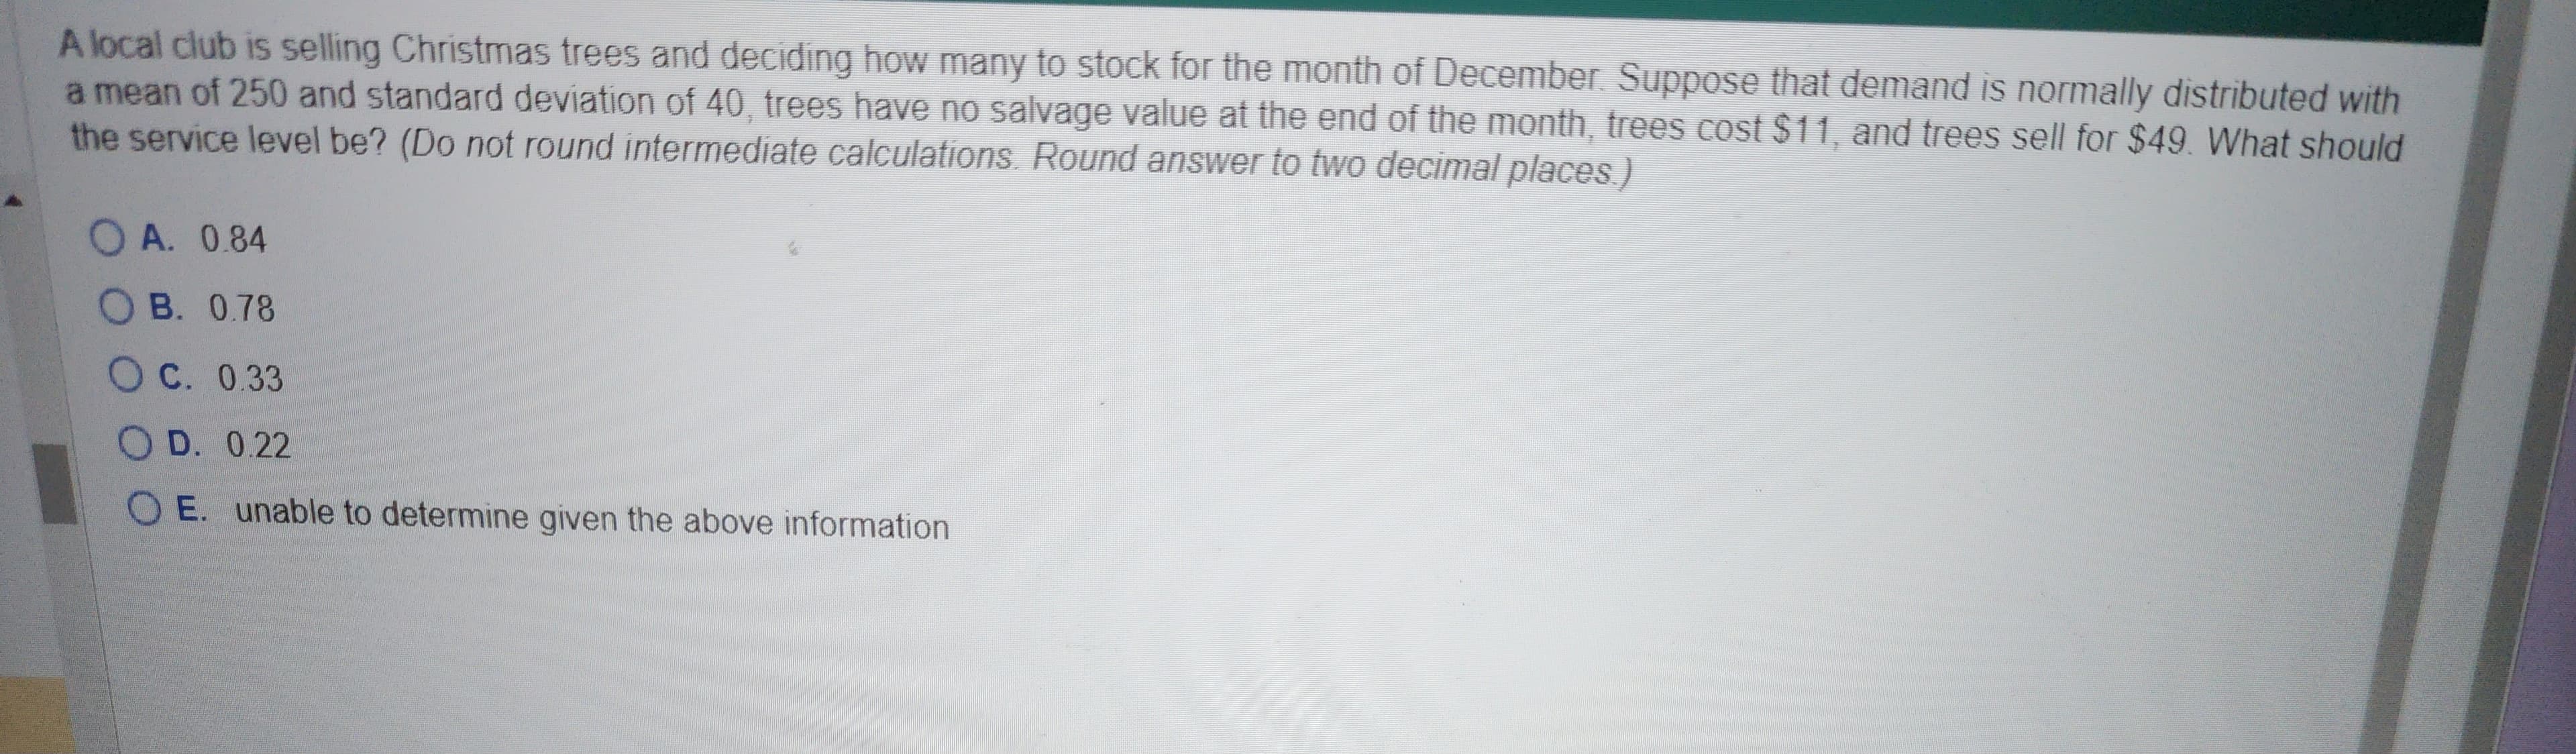 A local club is selling Christmas trees and deciding how many to stock for the month of December. Suppose that demand is normally distributed with
a mean of 250 and standard deviation of 40, trees have no salvage value at the end of the month, trees cost $11, and trees sell for $49. What should
the service level be? (Do not round intermediate calculations. Round answer to two decimal places.)
OA. 0.84
OB. 0.78
OC. 0.33
OD. 0.22
OE. unable to determine given the above information